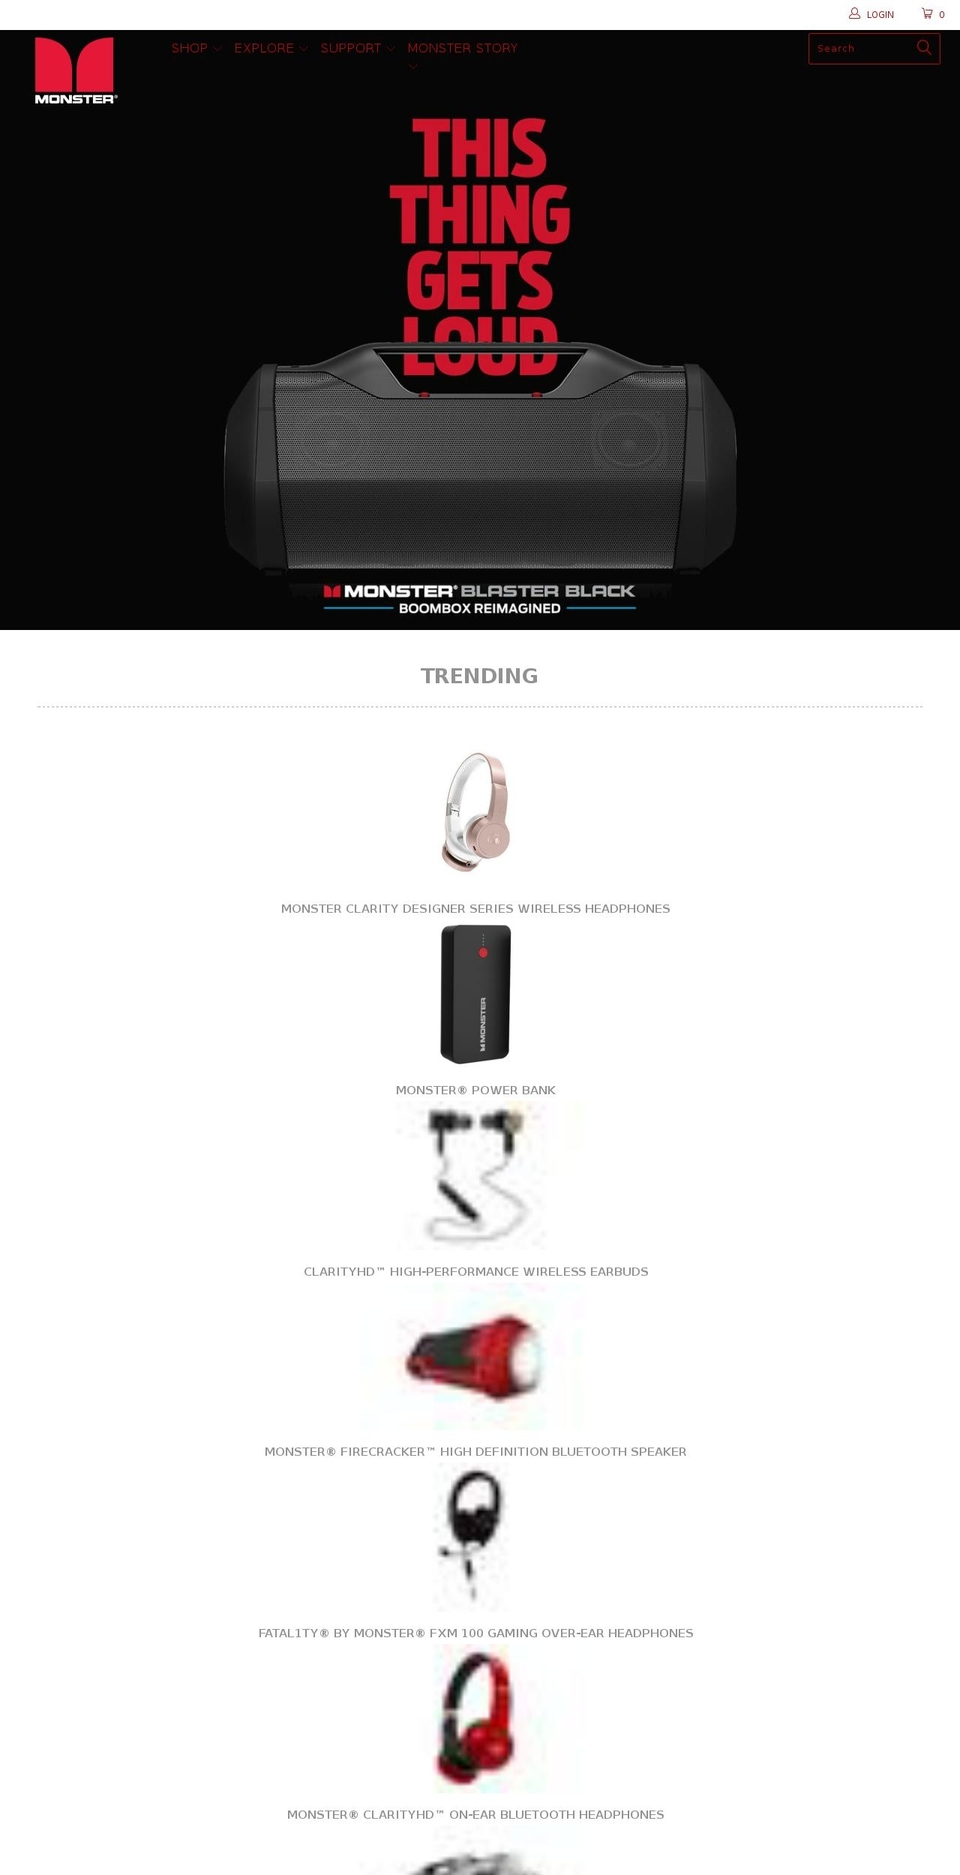 Checkout Upgrade [July 16] Shopify theme site example monster-hdmi-cable.com